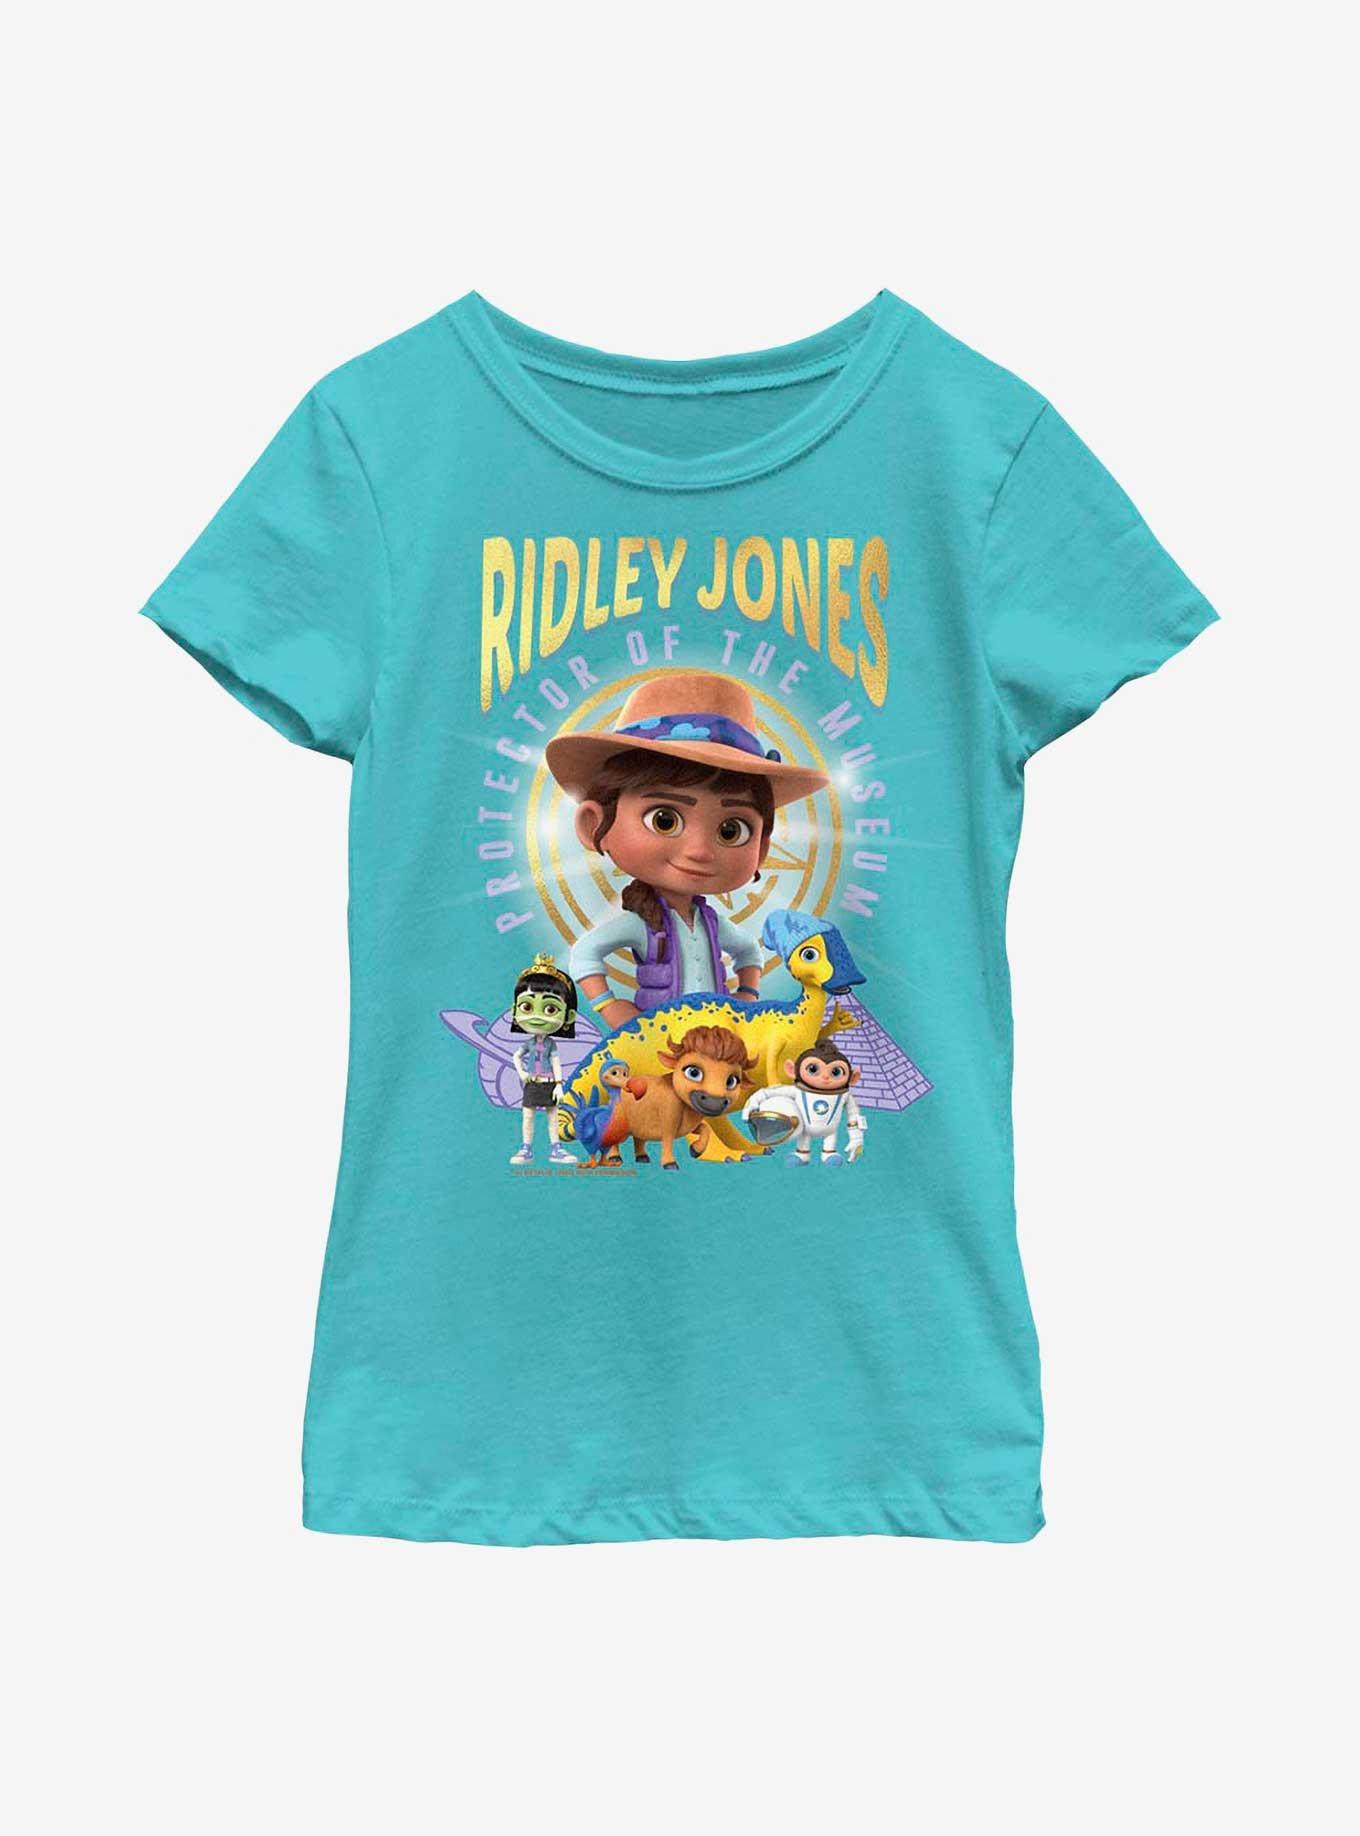 Ridley Jones Protector Of The Museum Youth Girls T-Shirt, , hi-res